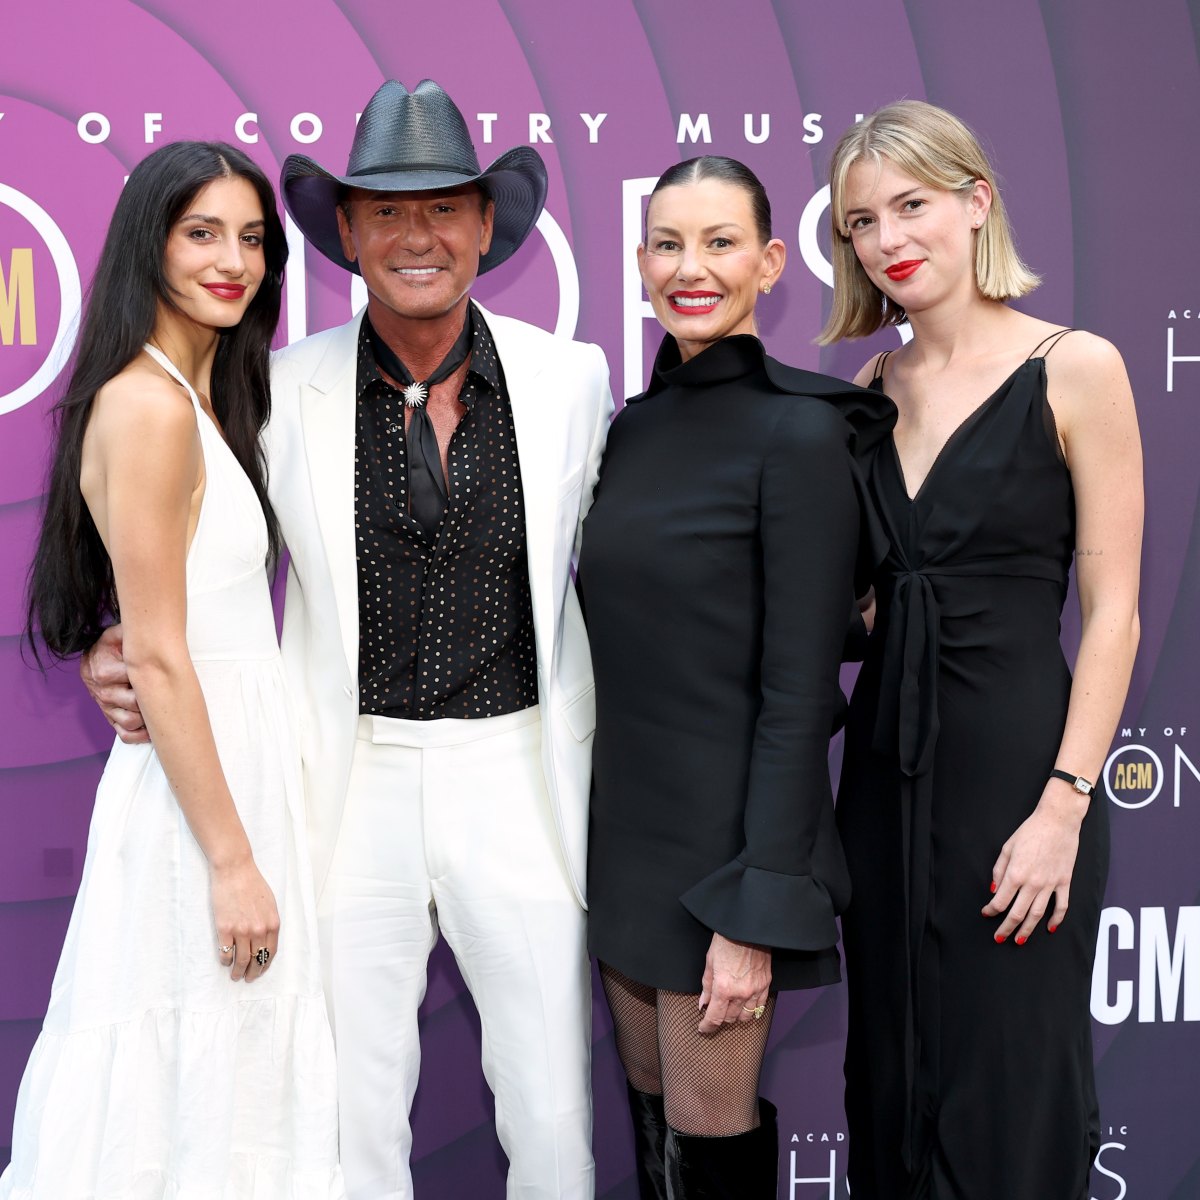 Tim McGraw's oldest daughter Gracie does a hilarious impression of